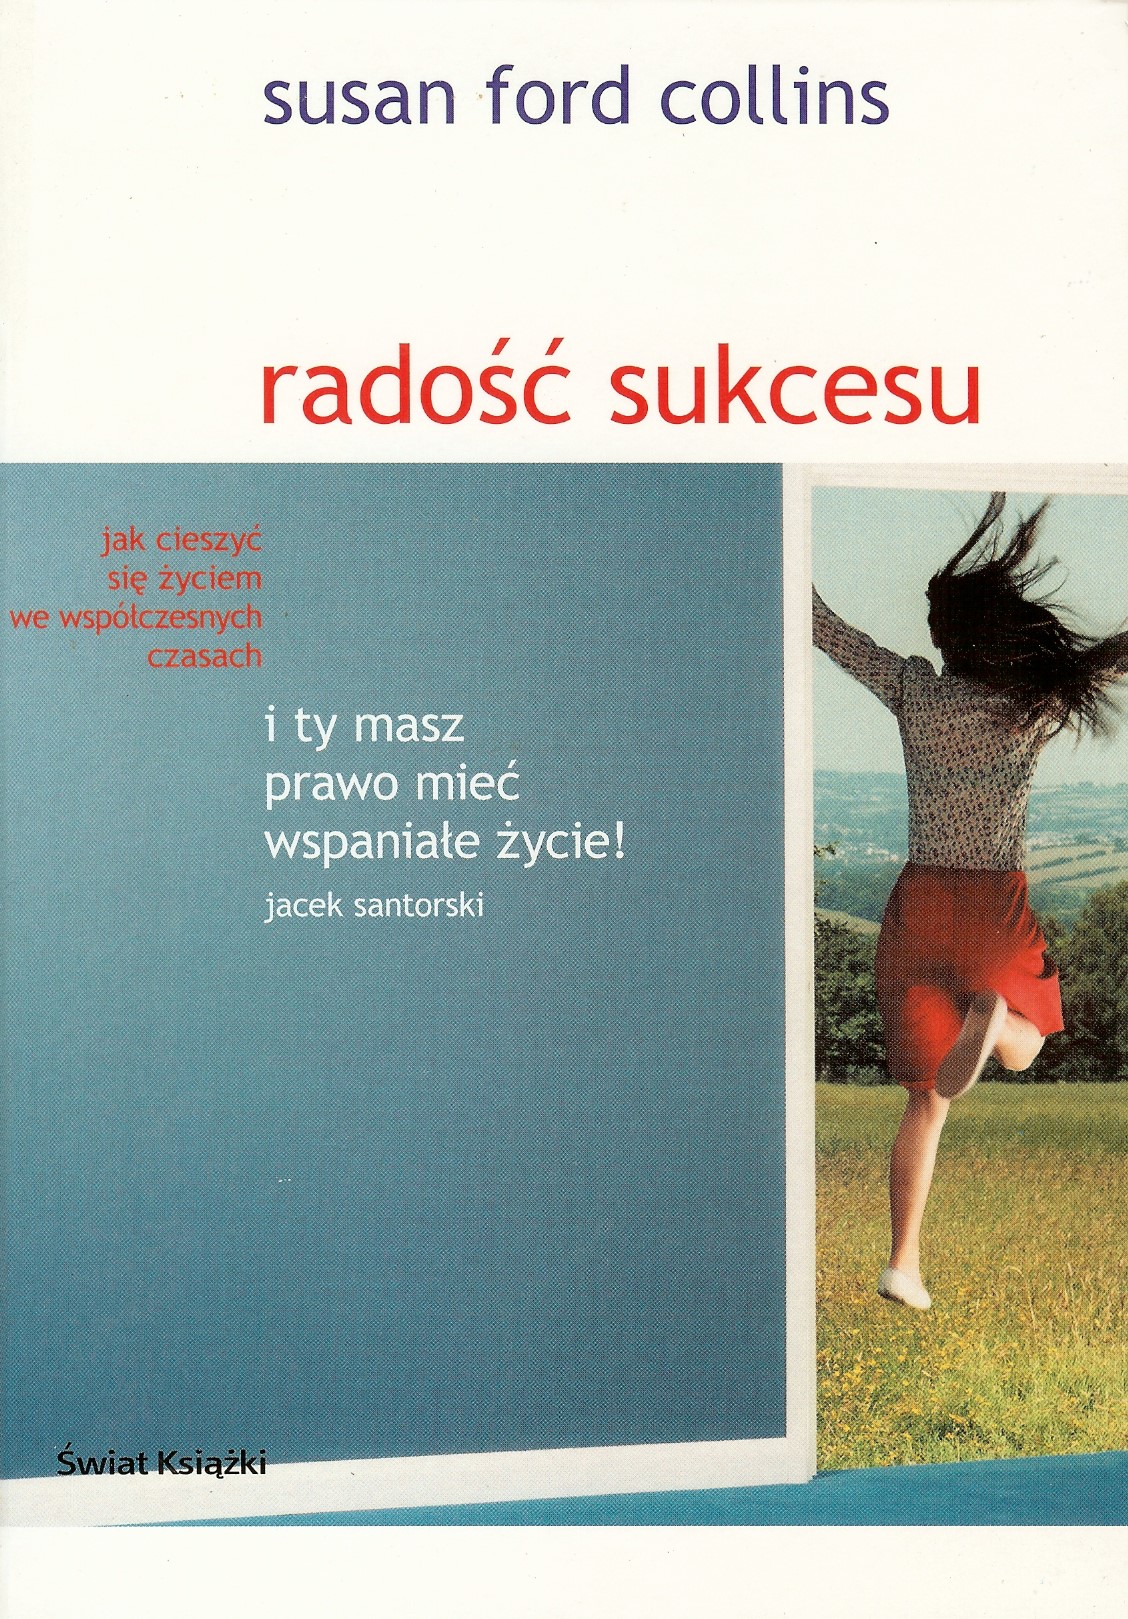 Copy of The Joy of Success in Polish